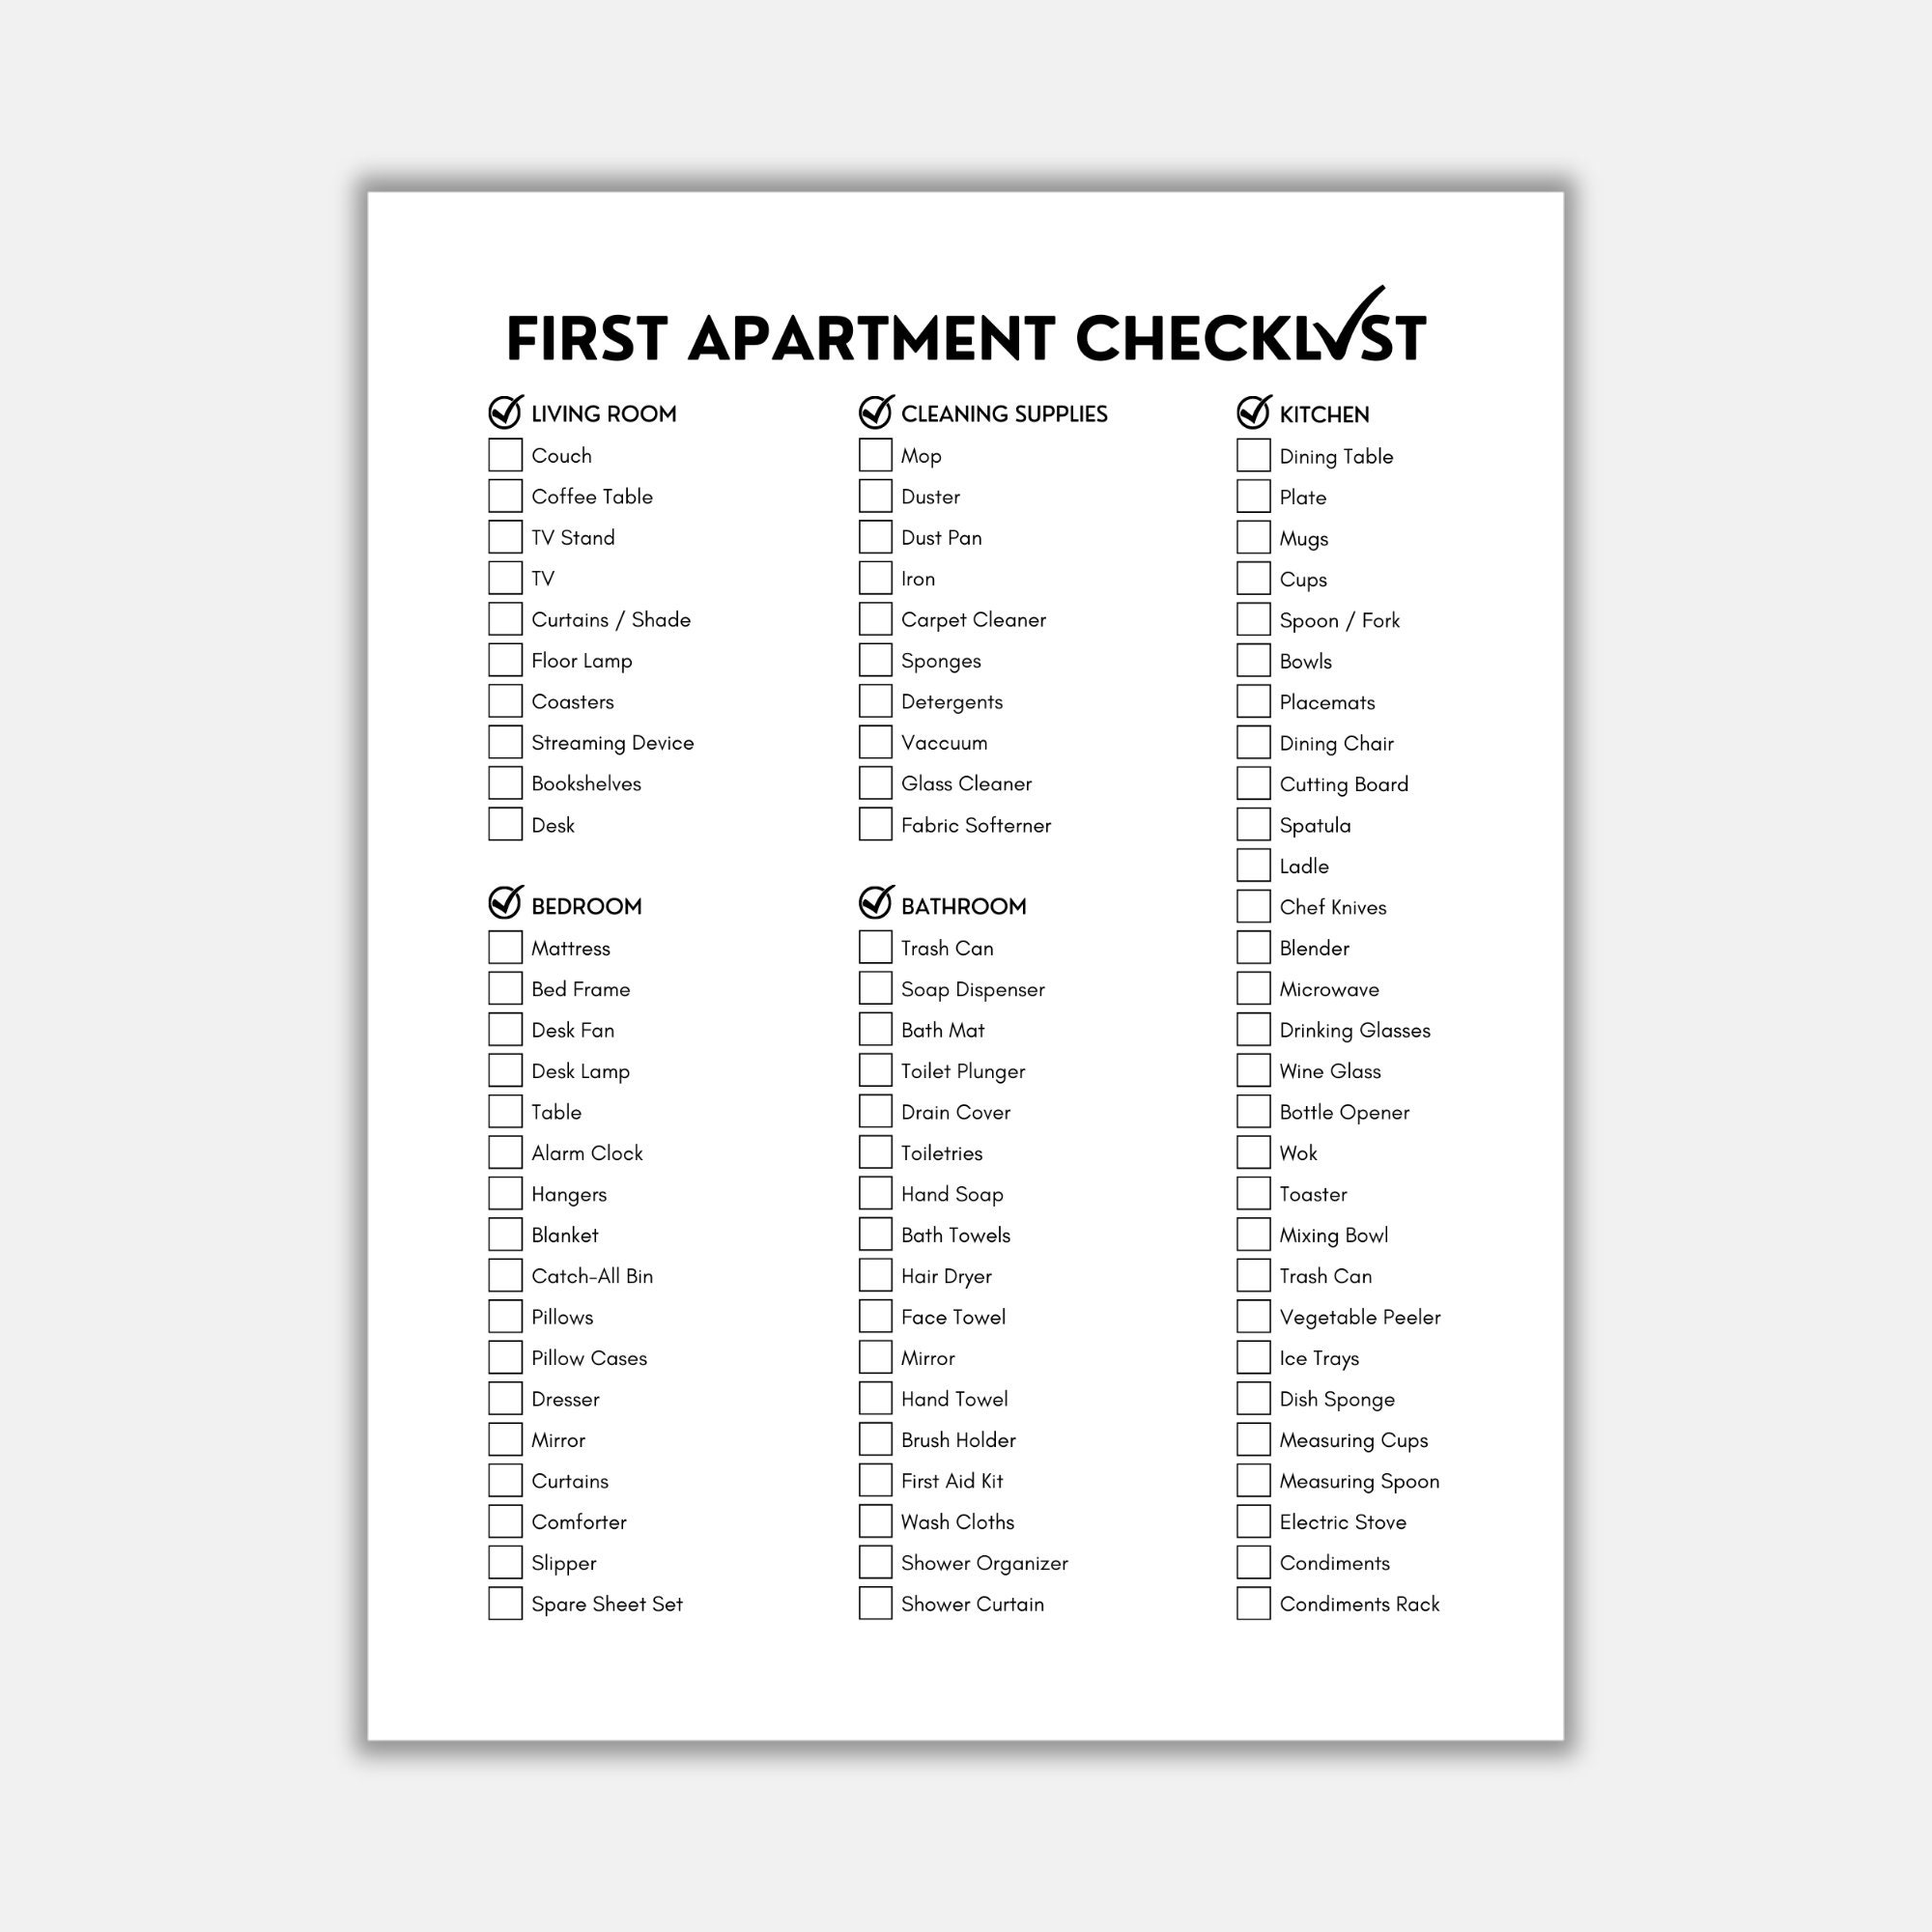 Kitchen List of Items for First Apartment- From a Recent College Grad